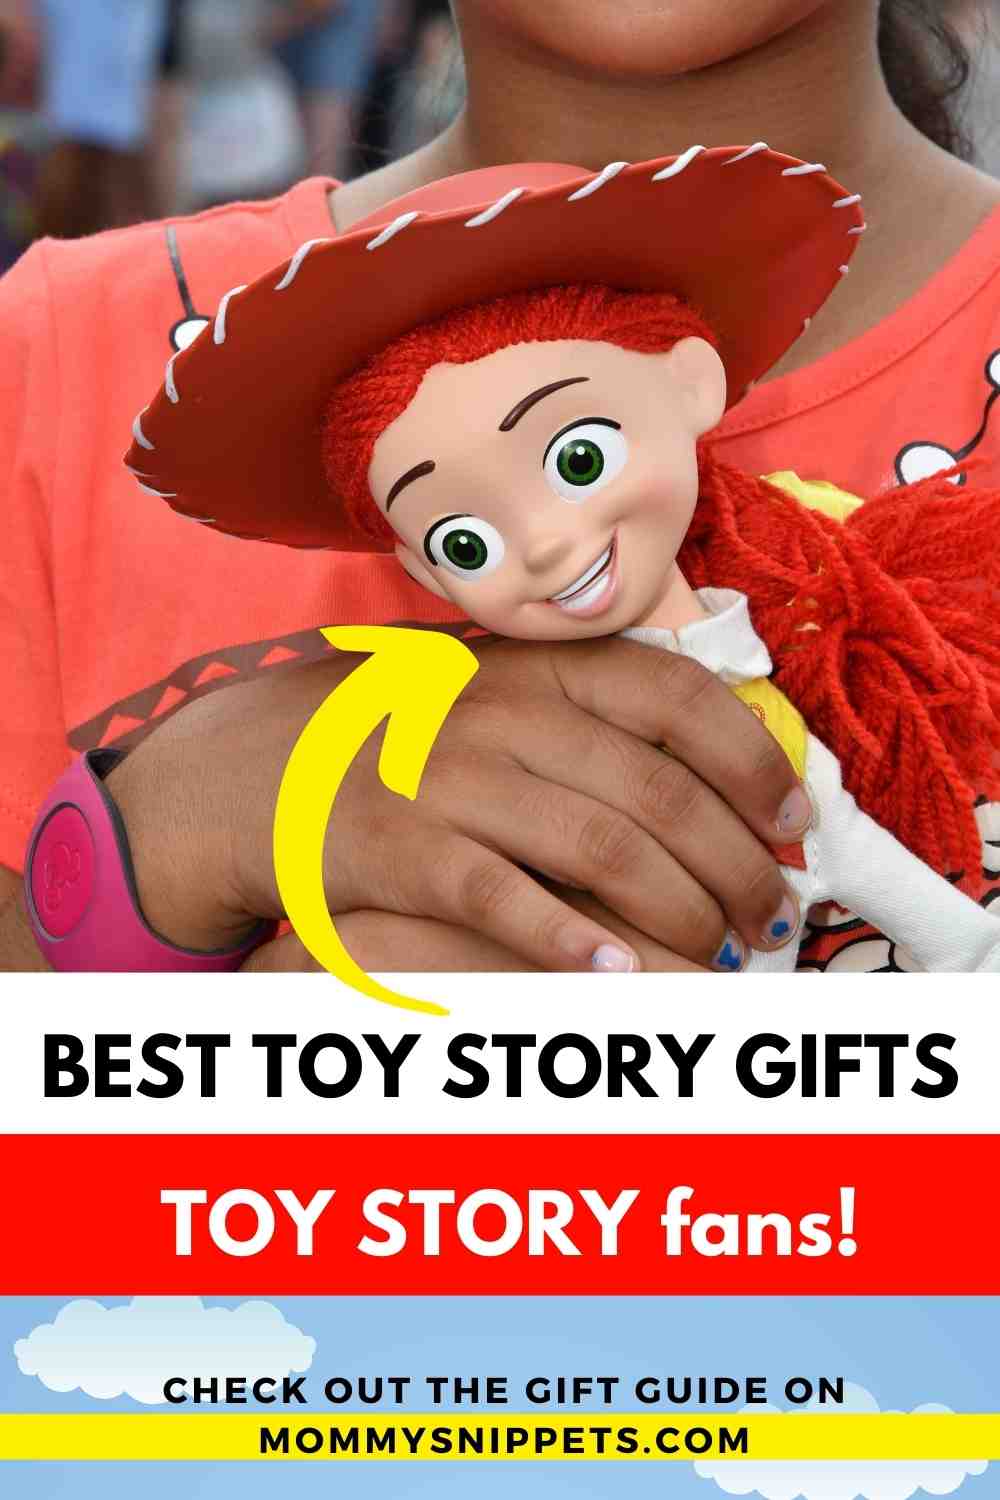 Best Toy Story gifts for Toy Story fans